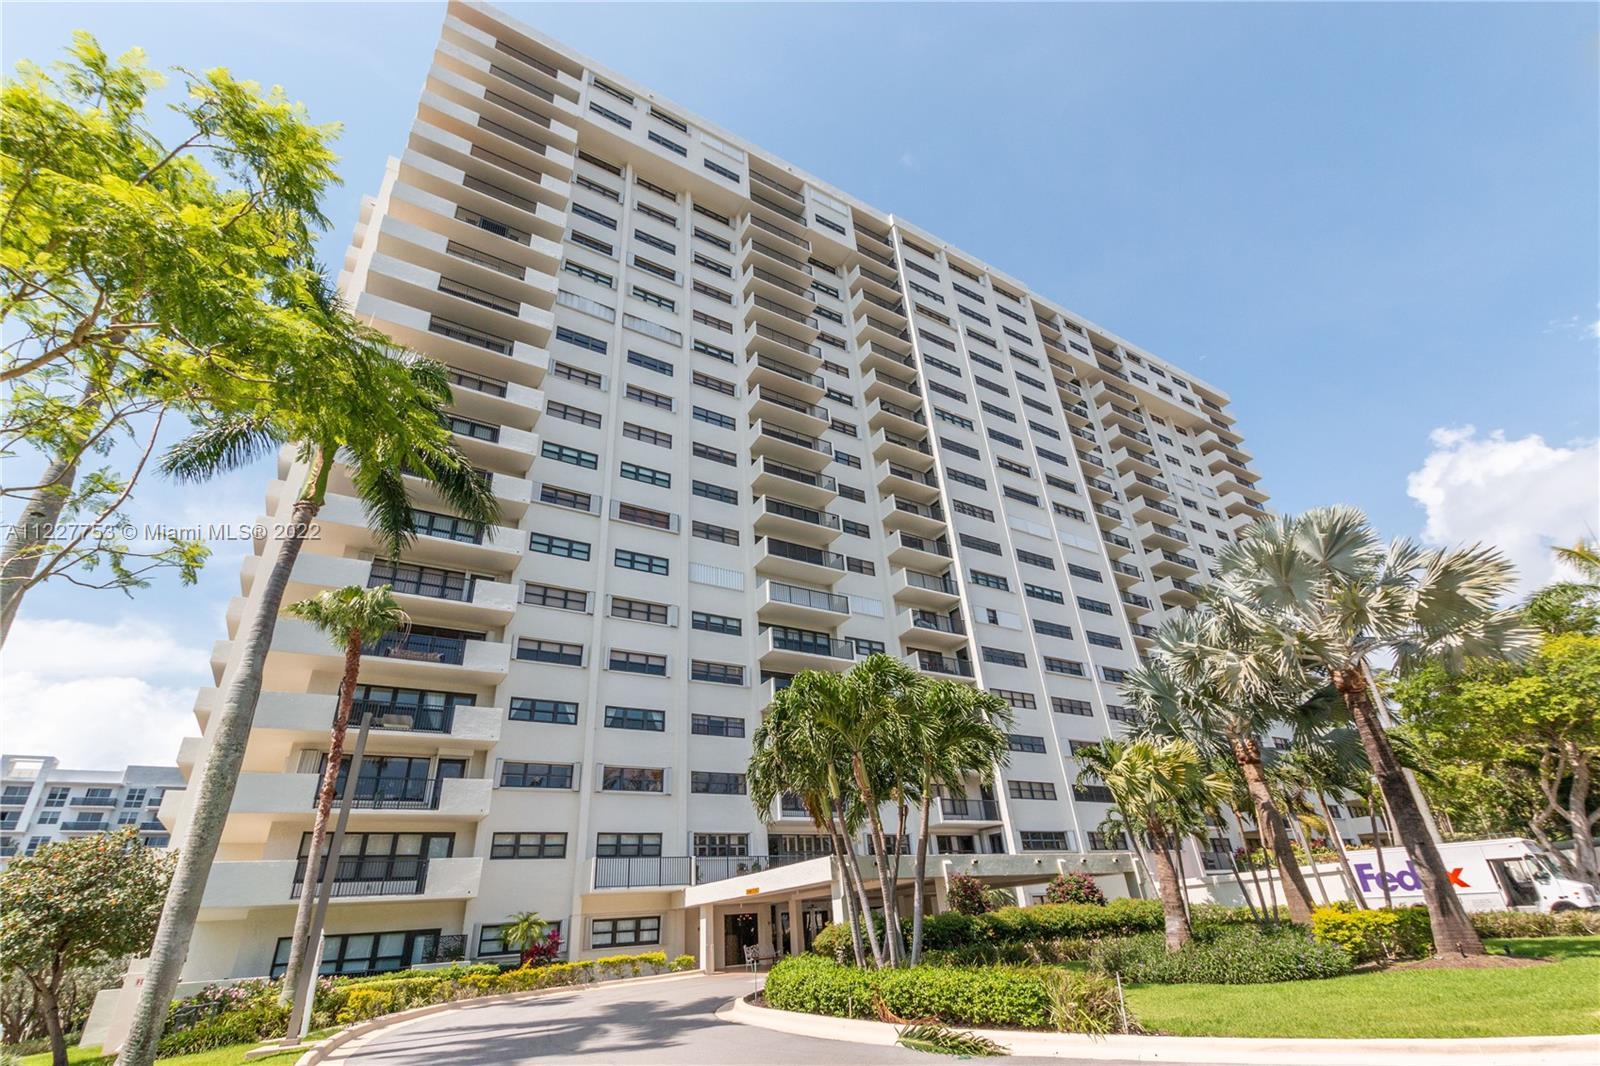 LARGE, AND VERY BRIGHT TWO-BEDROOM SPLIT FLOOR PLAN CONDO! BEAUTIFUL KITCHEN OFF THE DINING AREA tha